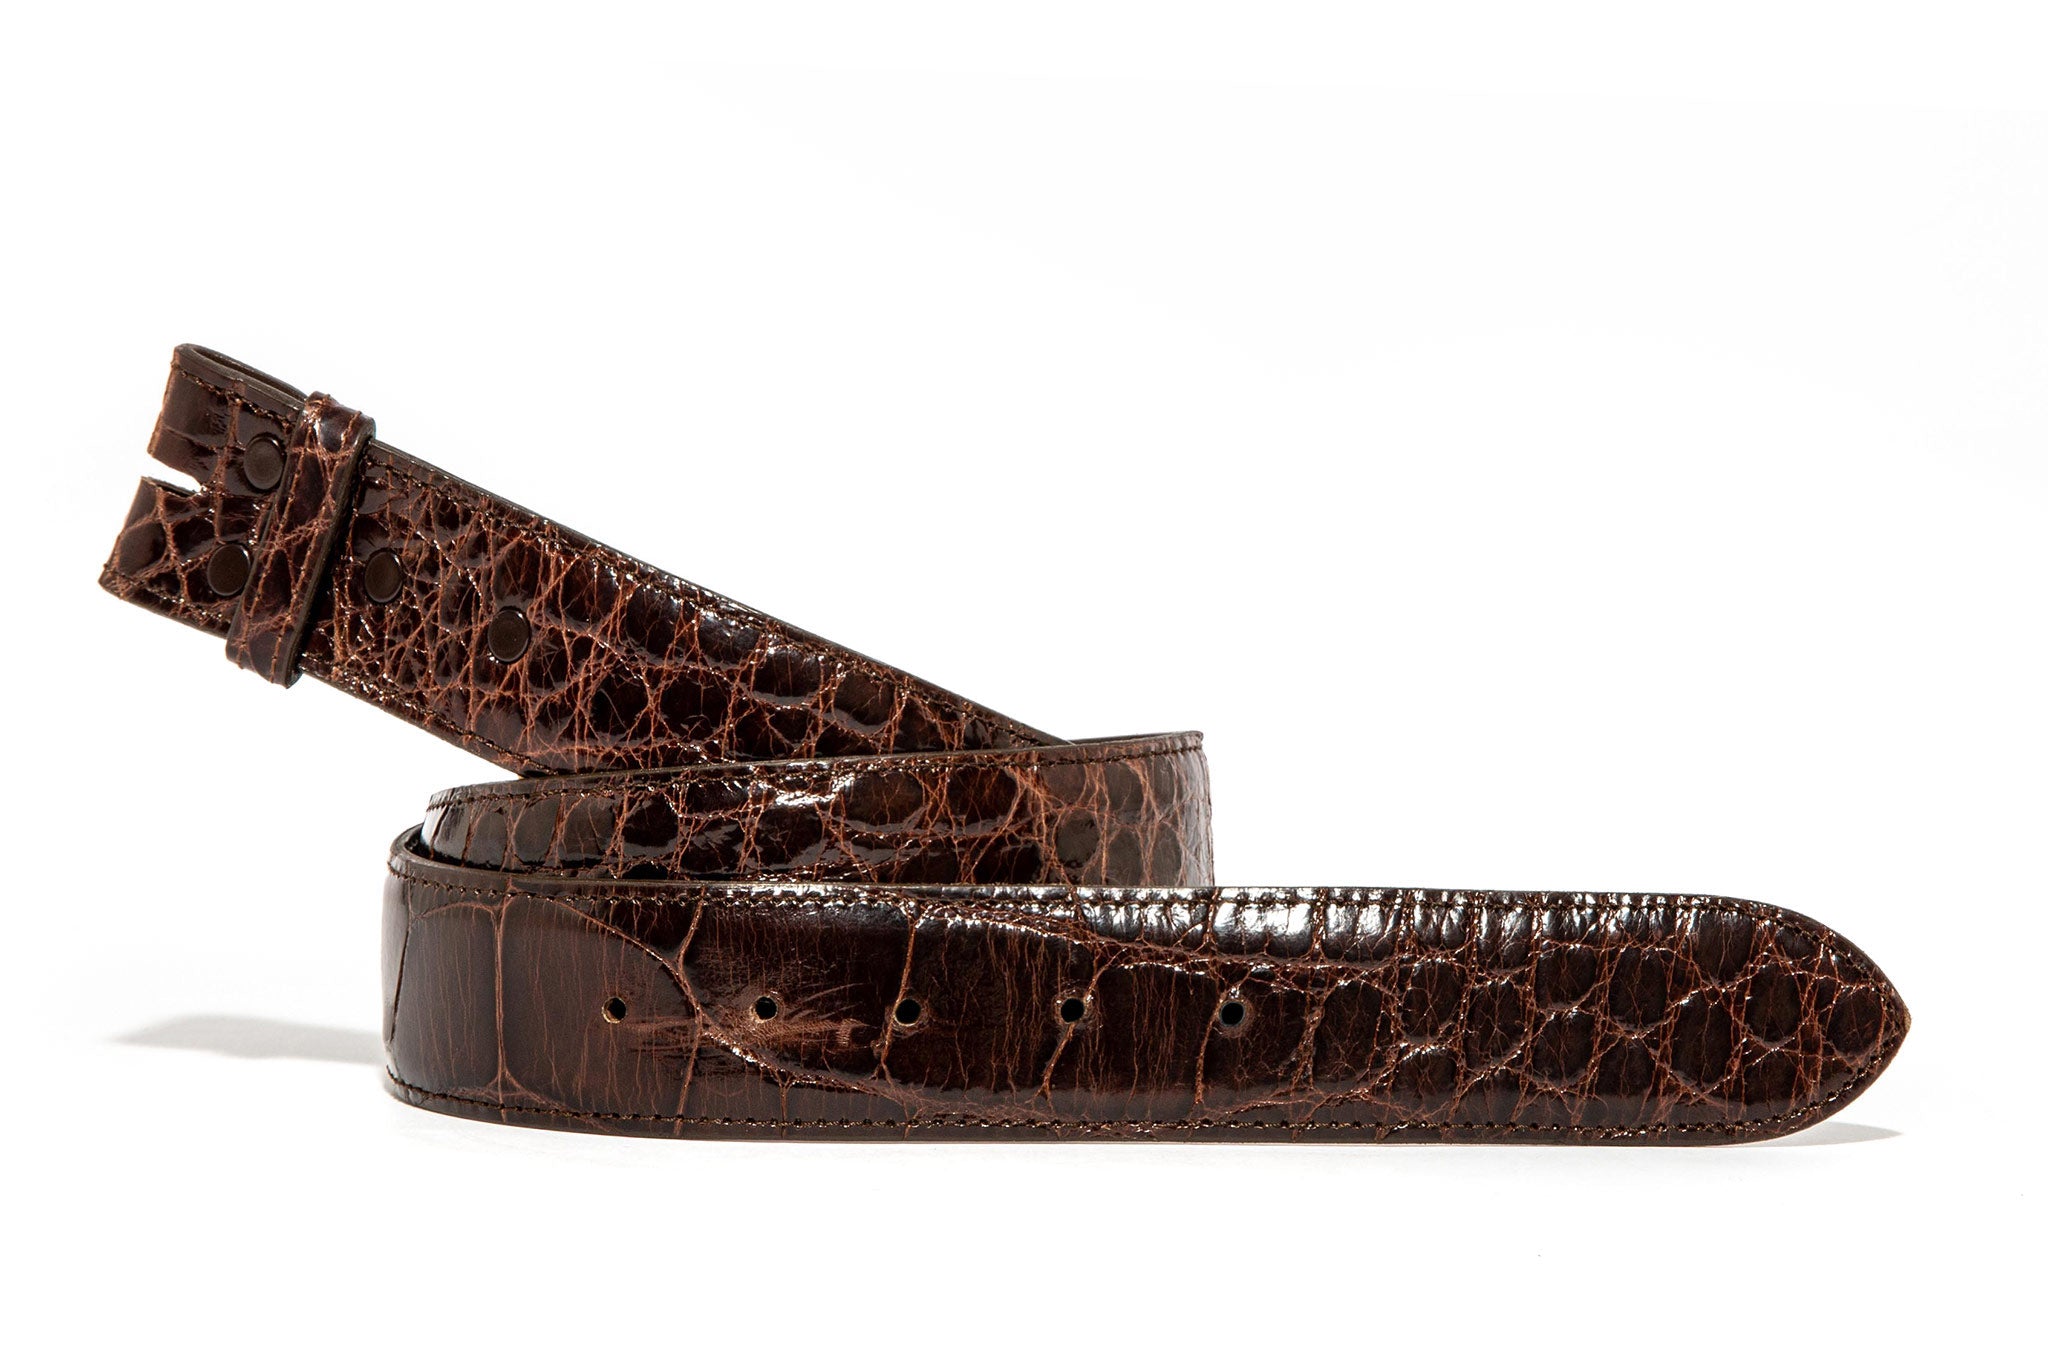 Chocolate Alligator Classic Strap | Belts And Buckles - Belts | Chacon